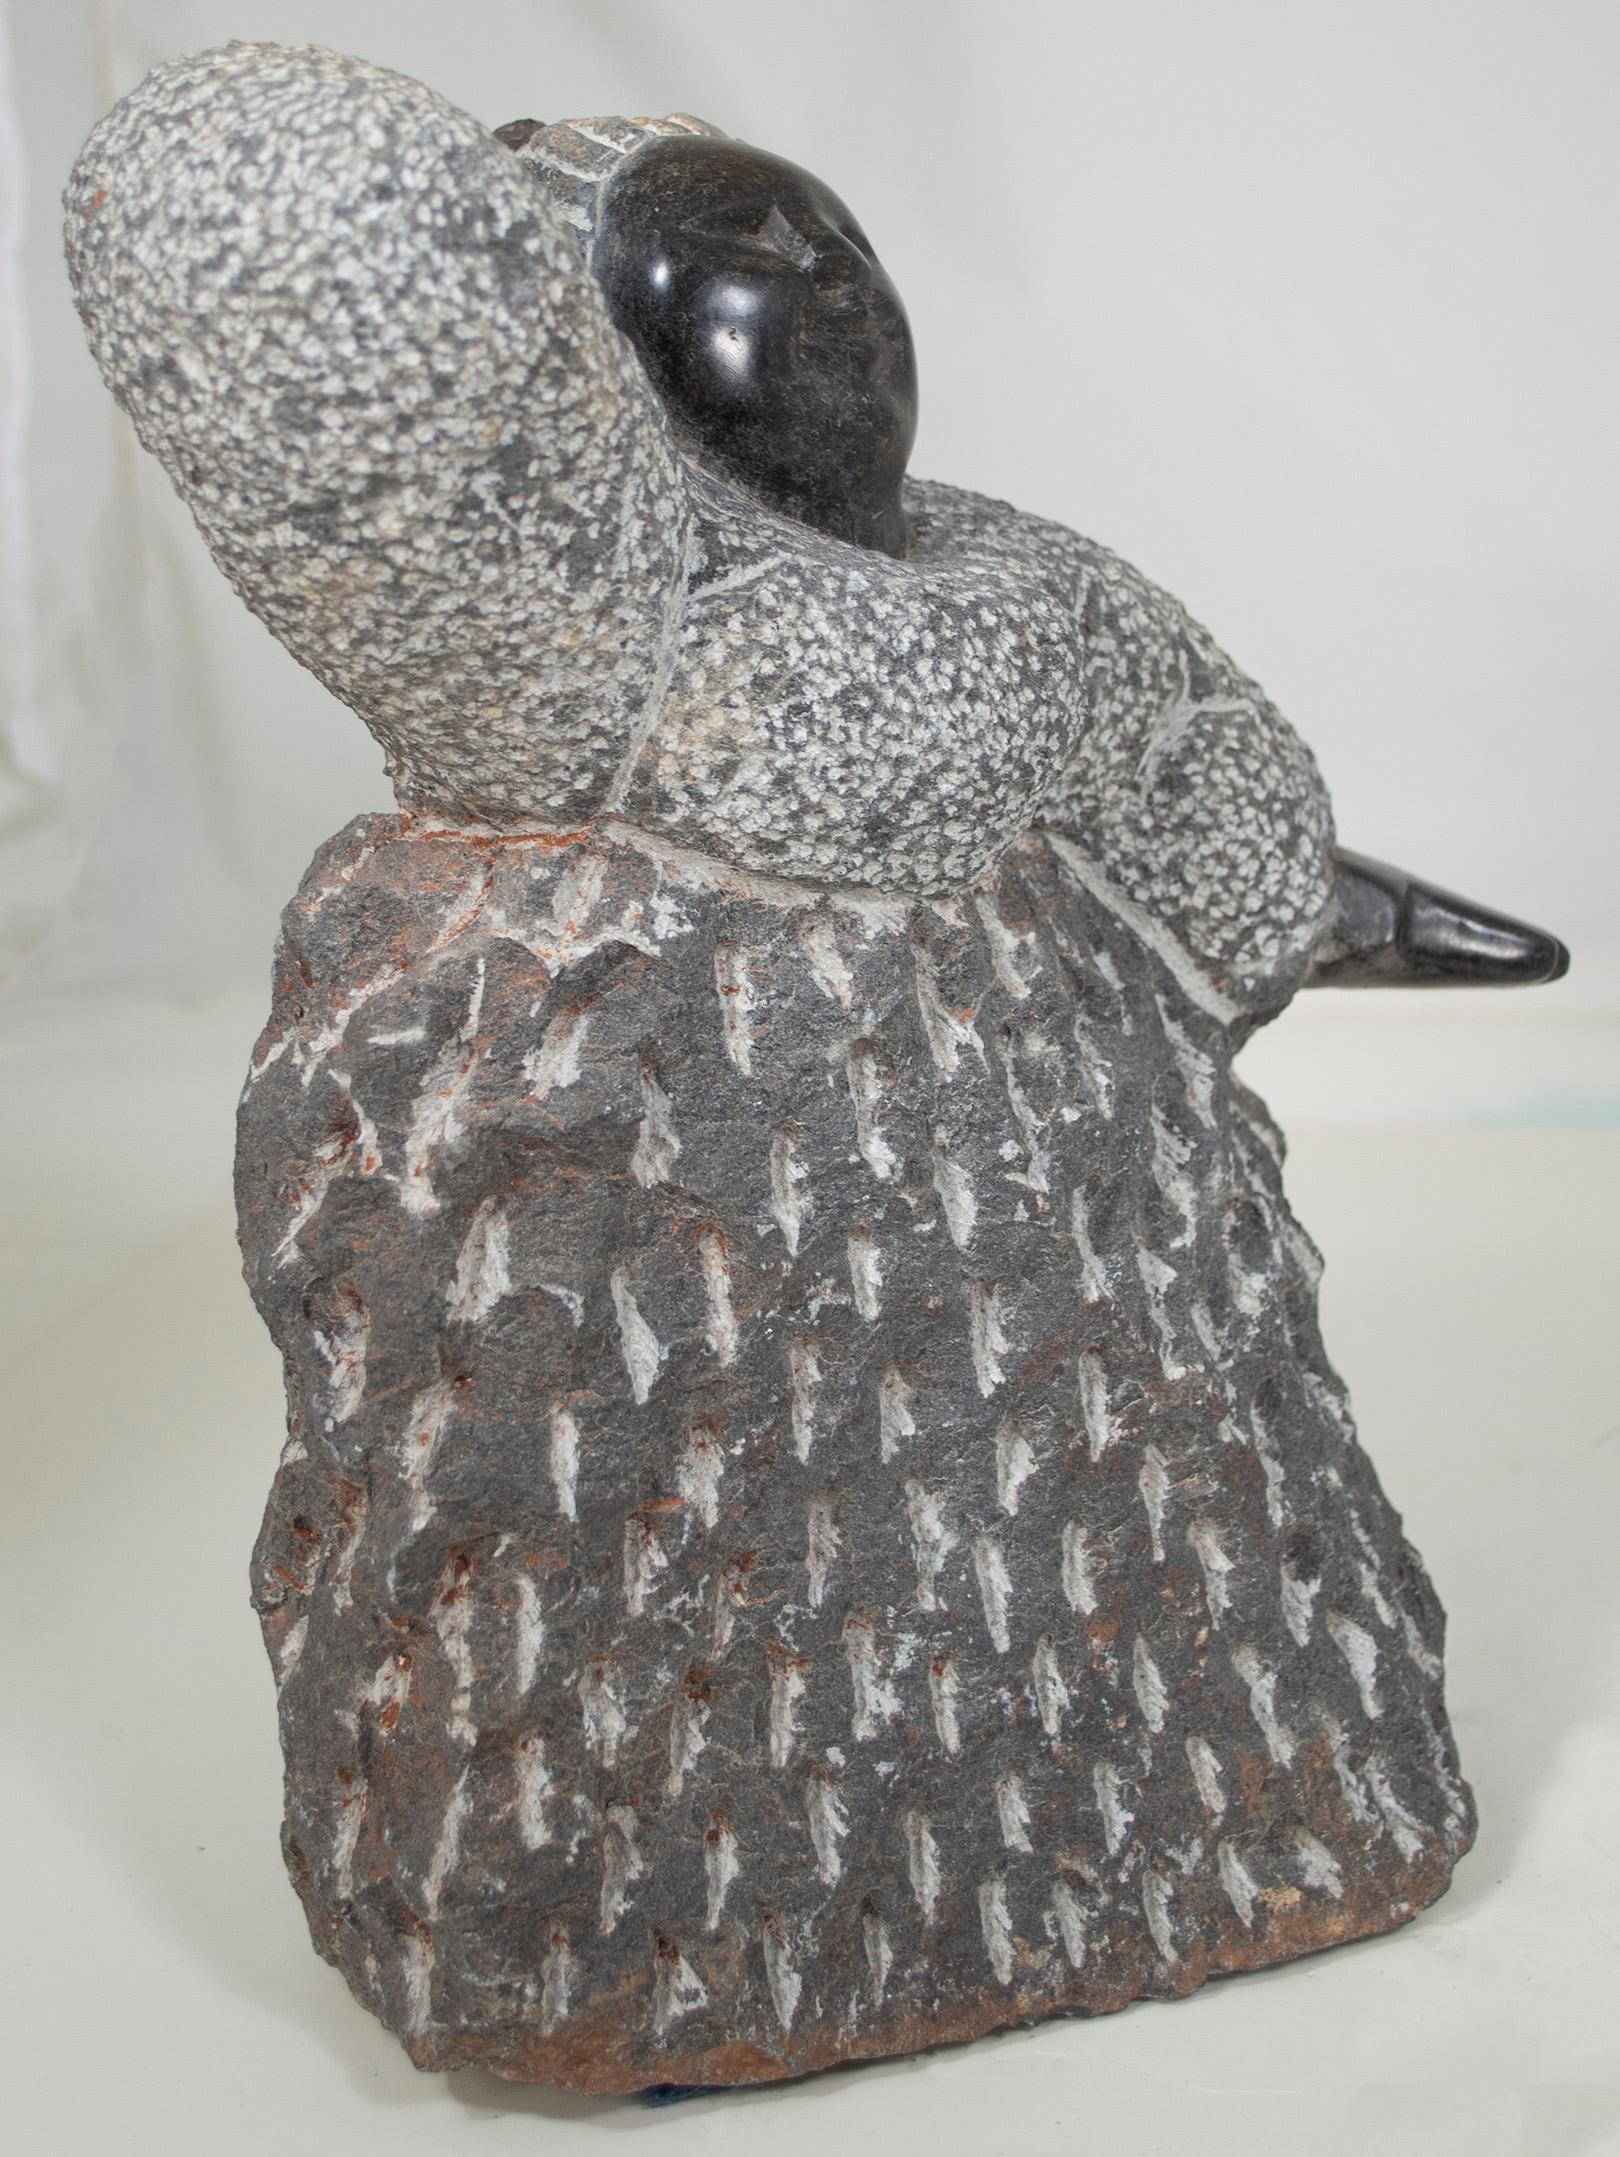 'Excited Girl' original Shona stone sculpture signed by Colleen Madamombe For Sale 1